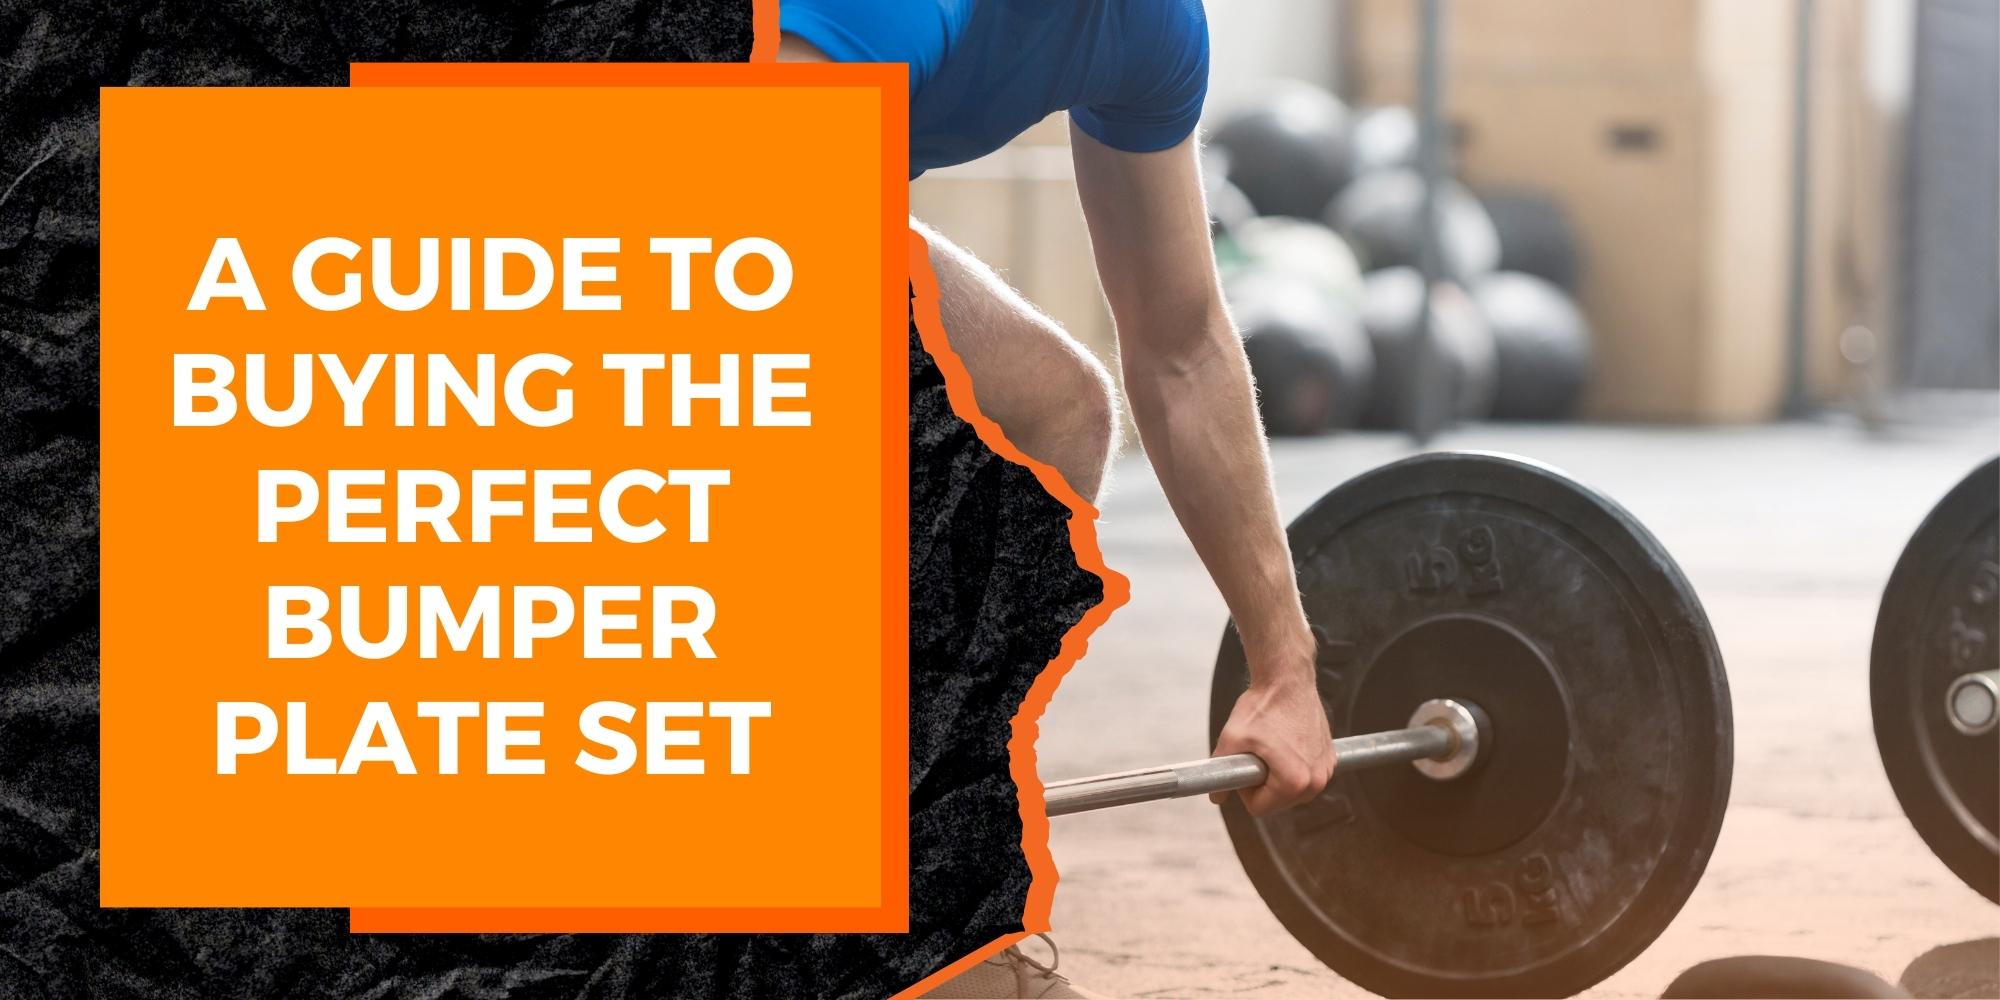 A Guide to Buying the Perfect Bumper Plate Set